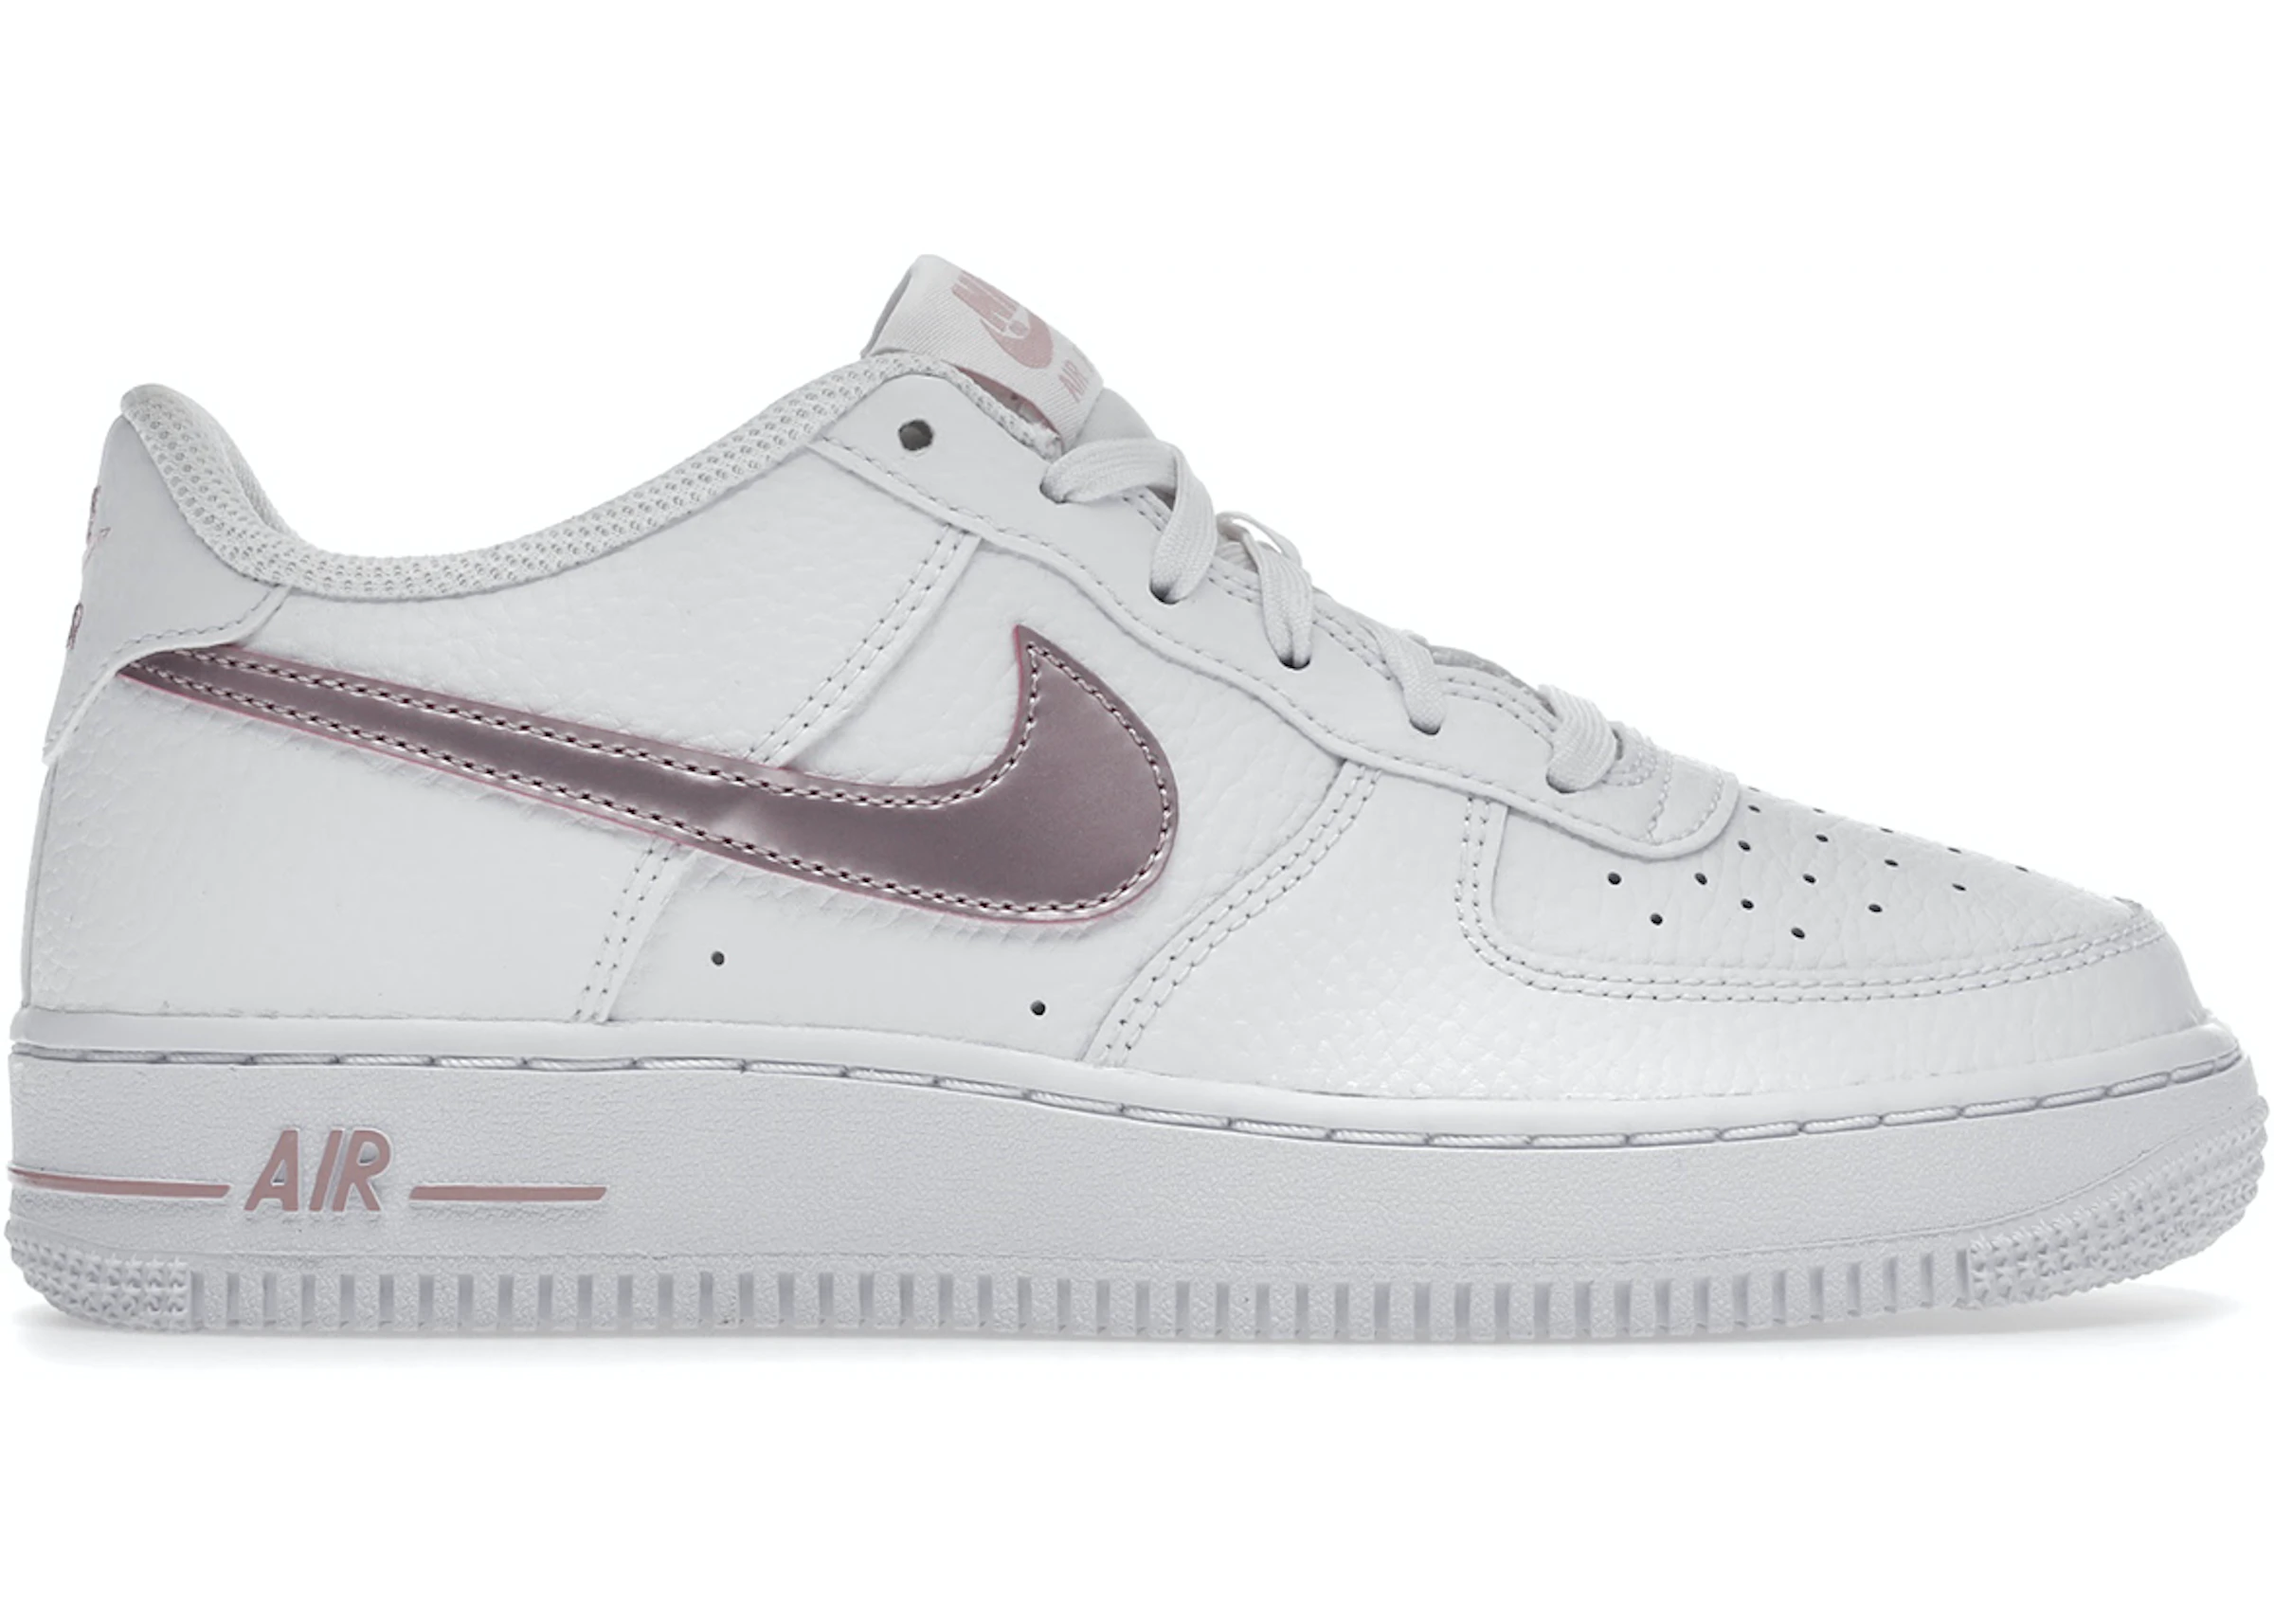 Productivo Probablemente Insignia Nike Air Force 1 Low White Pink Glaze (GS) - CT3839-104 - ES